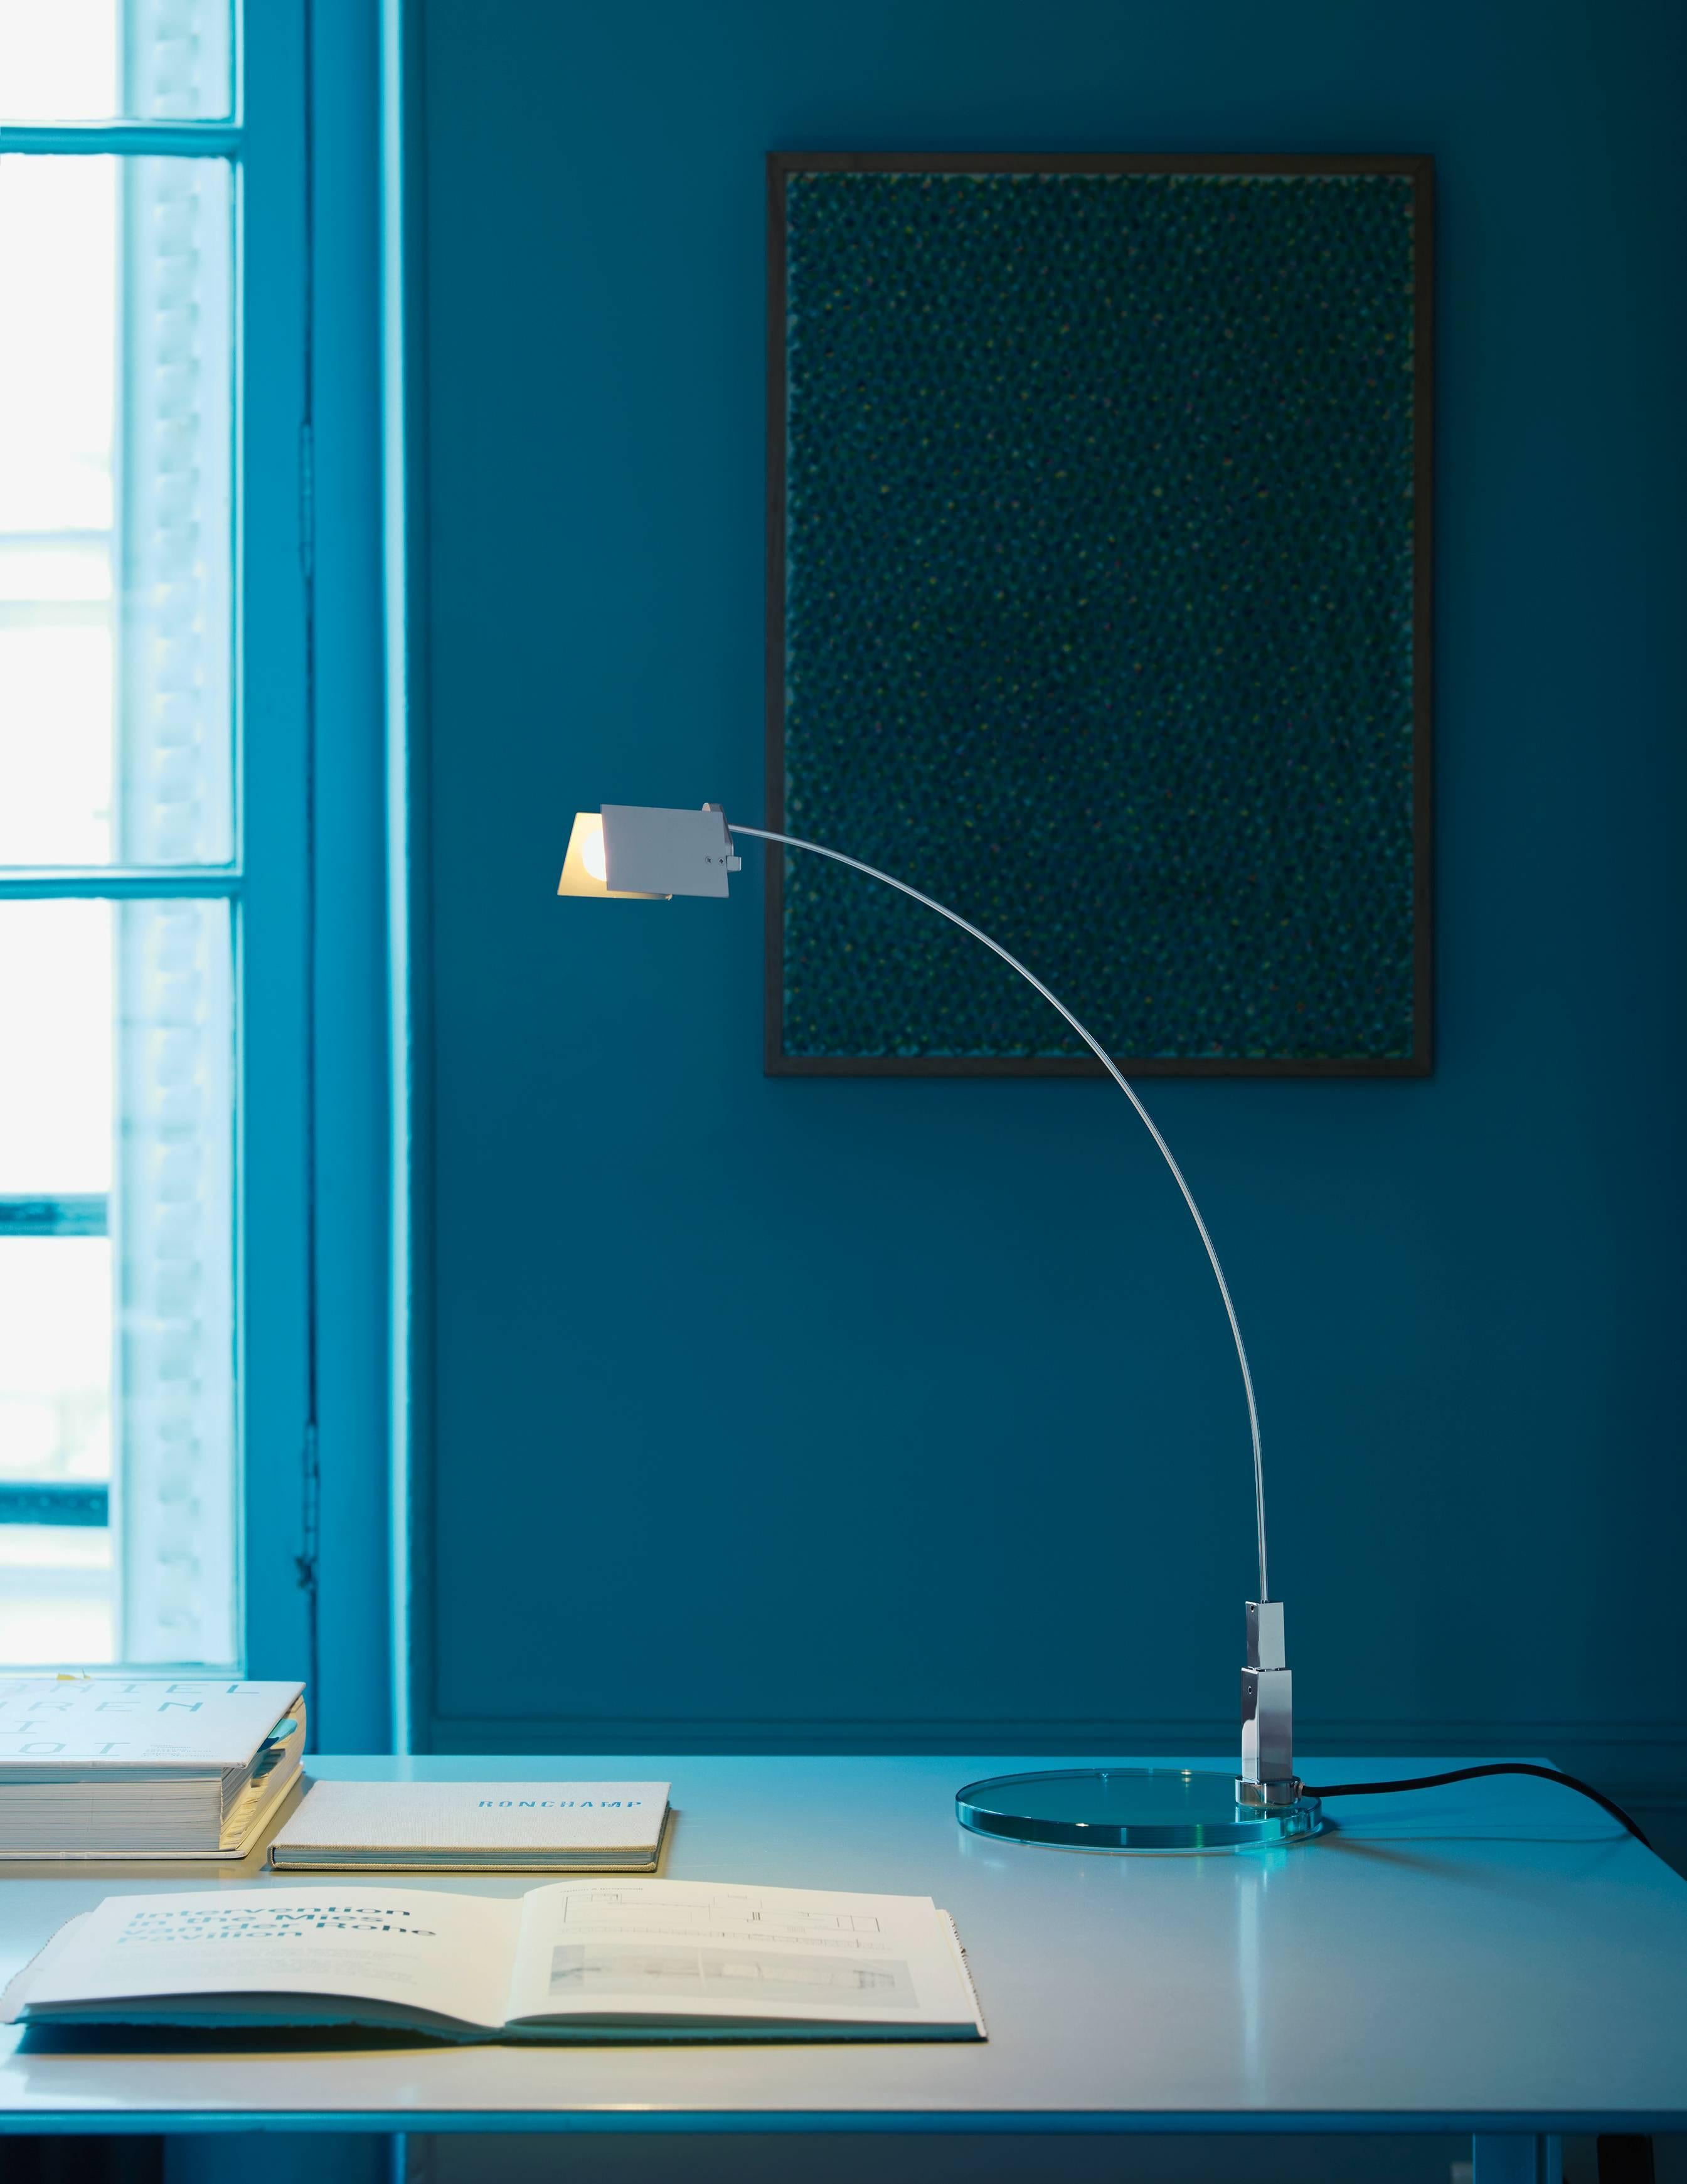 Designed by Alvaro Siza and manufactured by Fontana Arte, the Falena Table Lamp comes in chromed metal, designed in 1994. It is a representation of lightness and elegance for this family of lamps designed by Alvaro Siza and available in floor, table